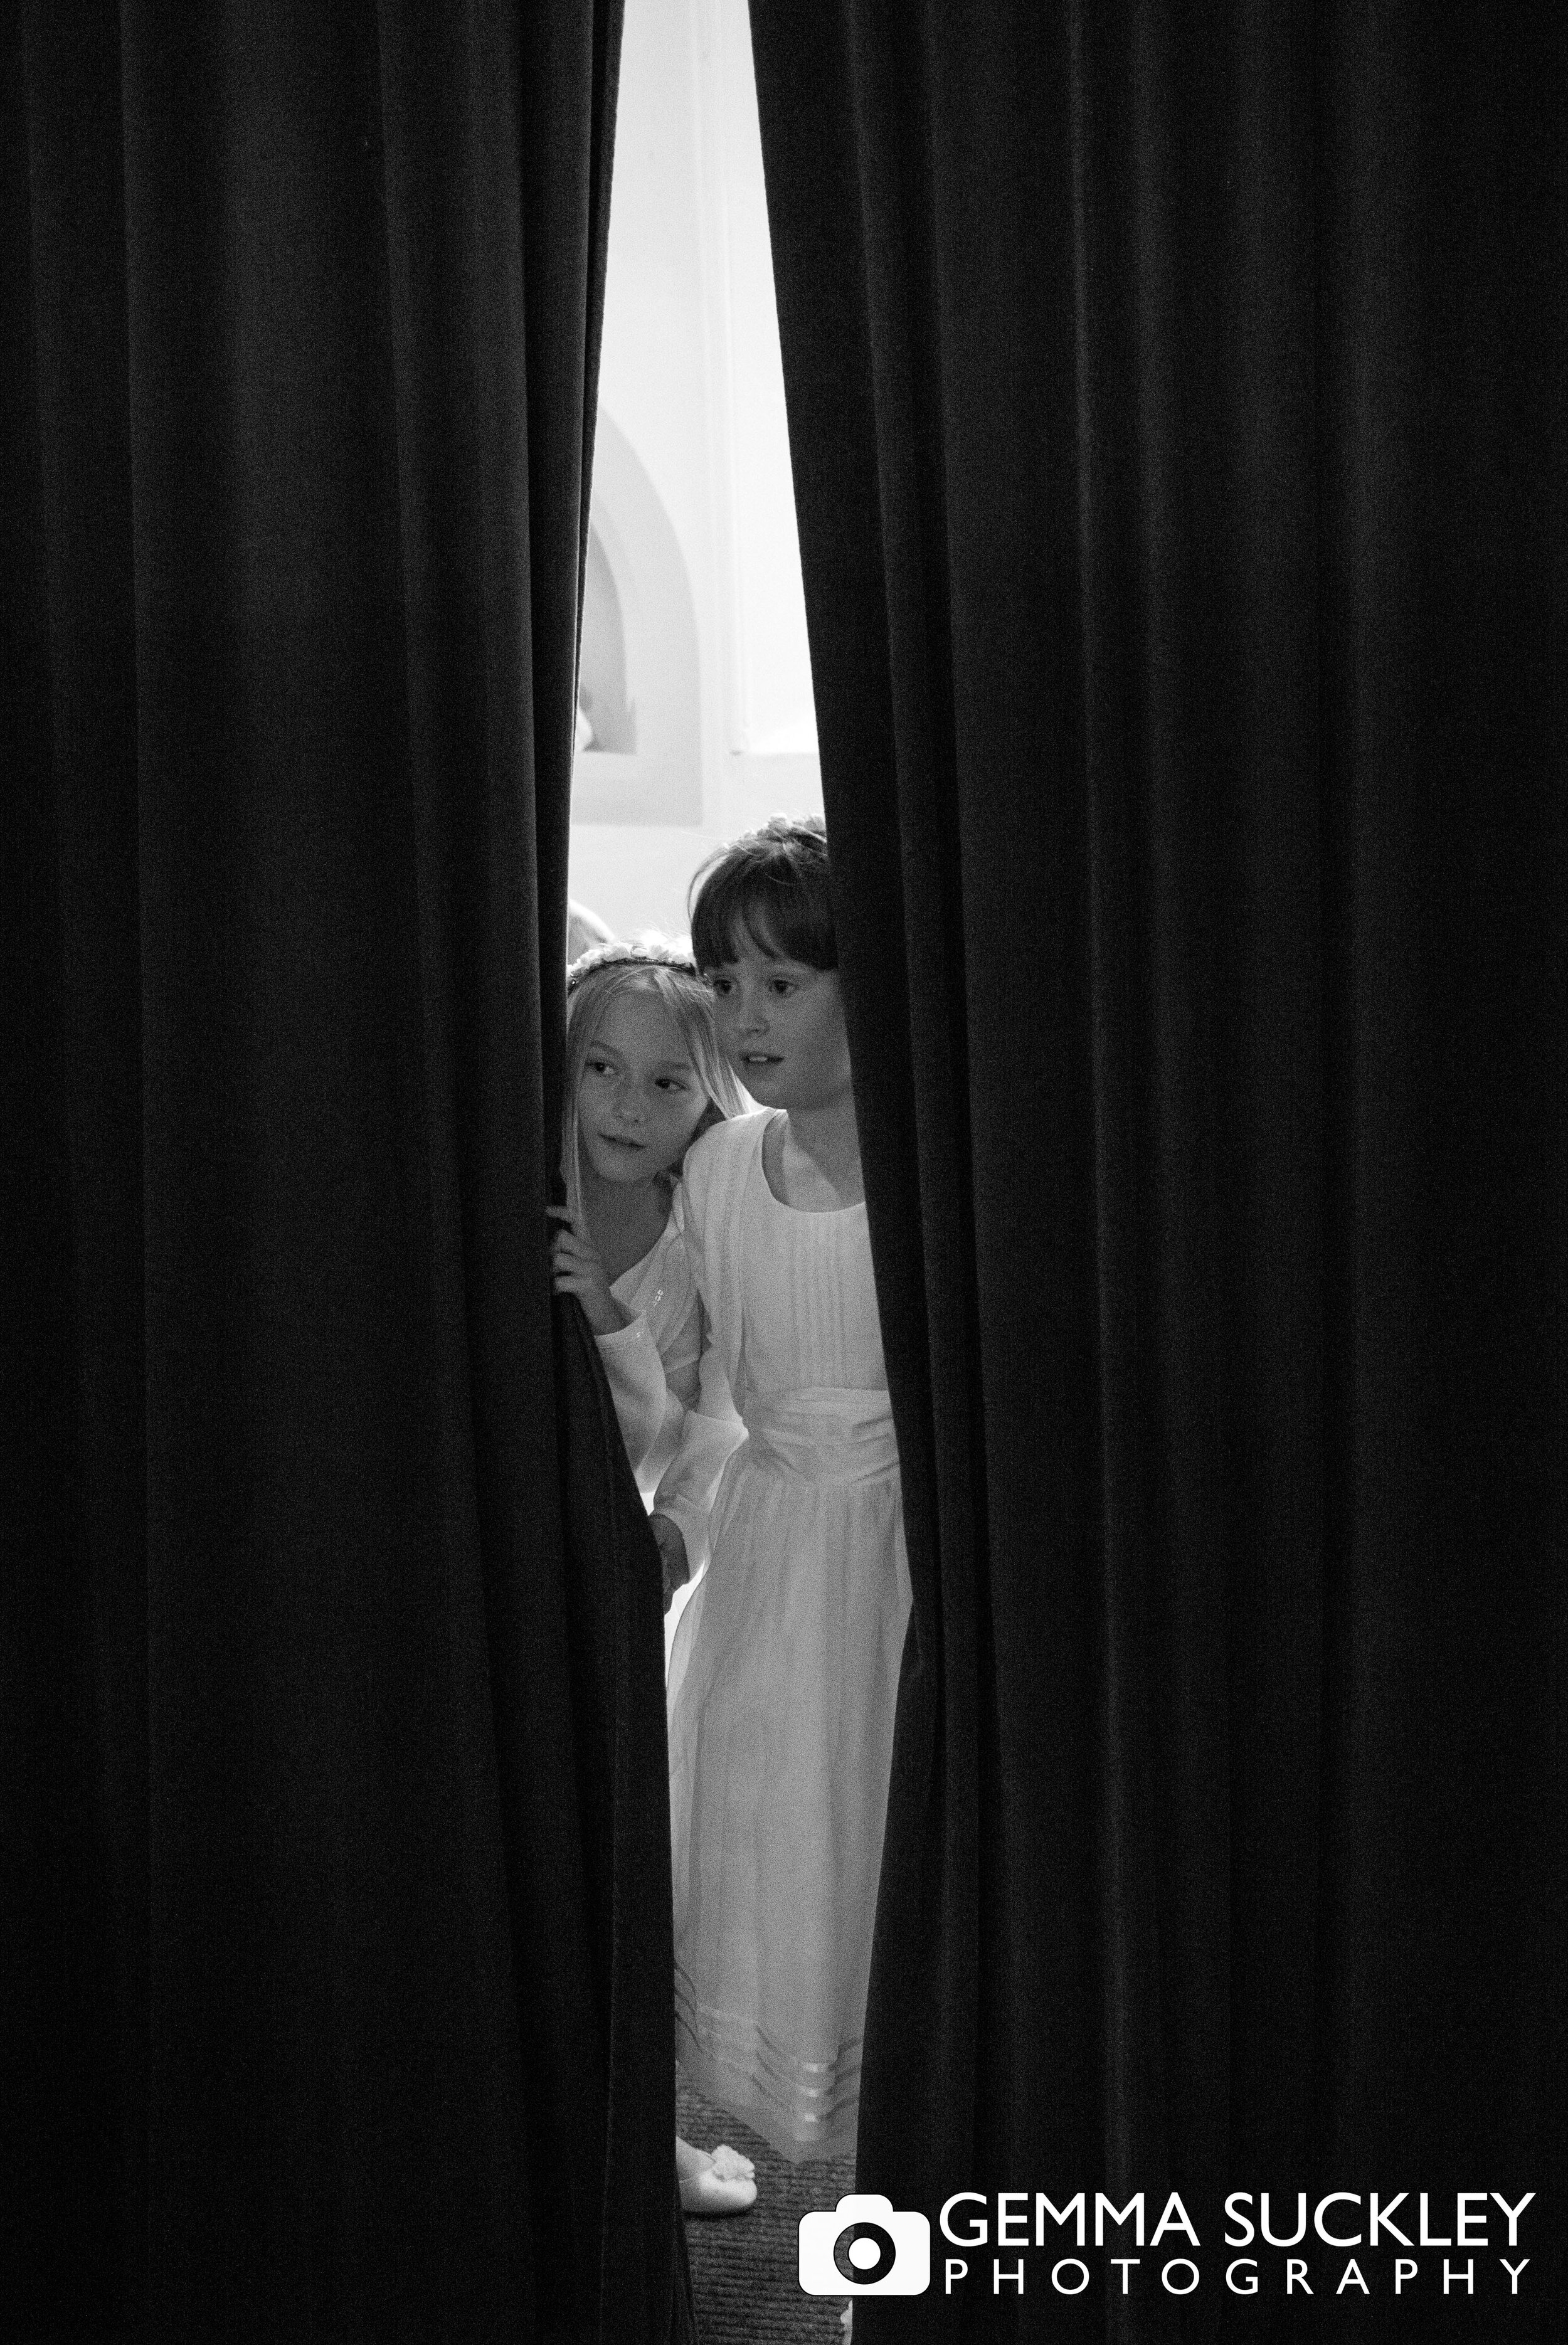 two flower girls peaking from being curtains at a wedding